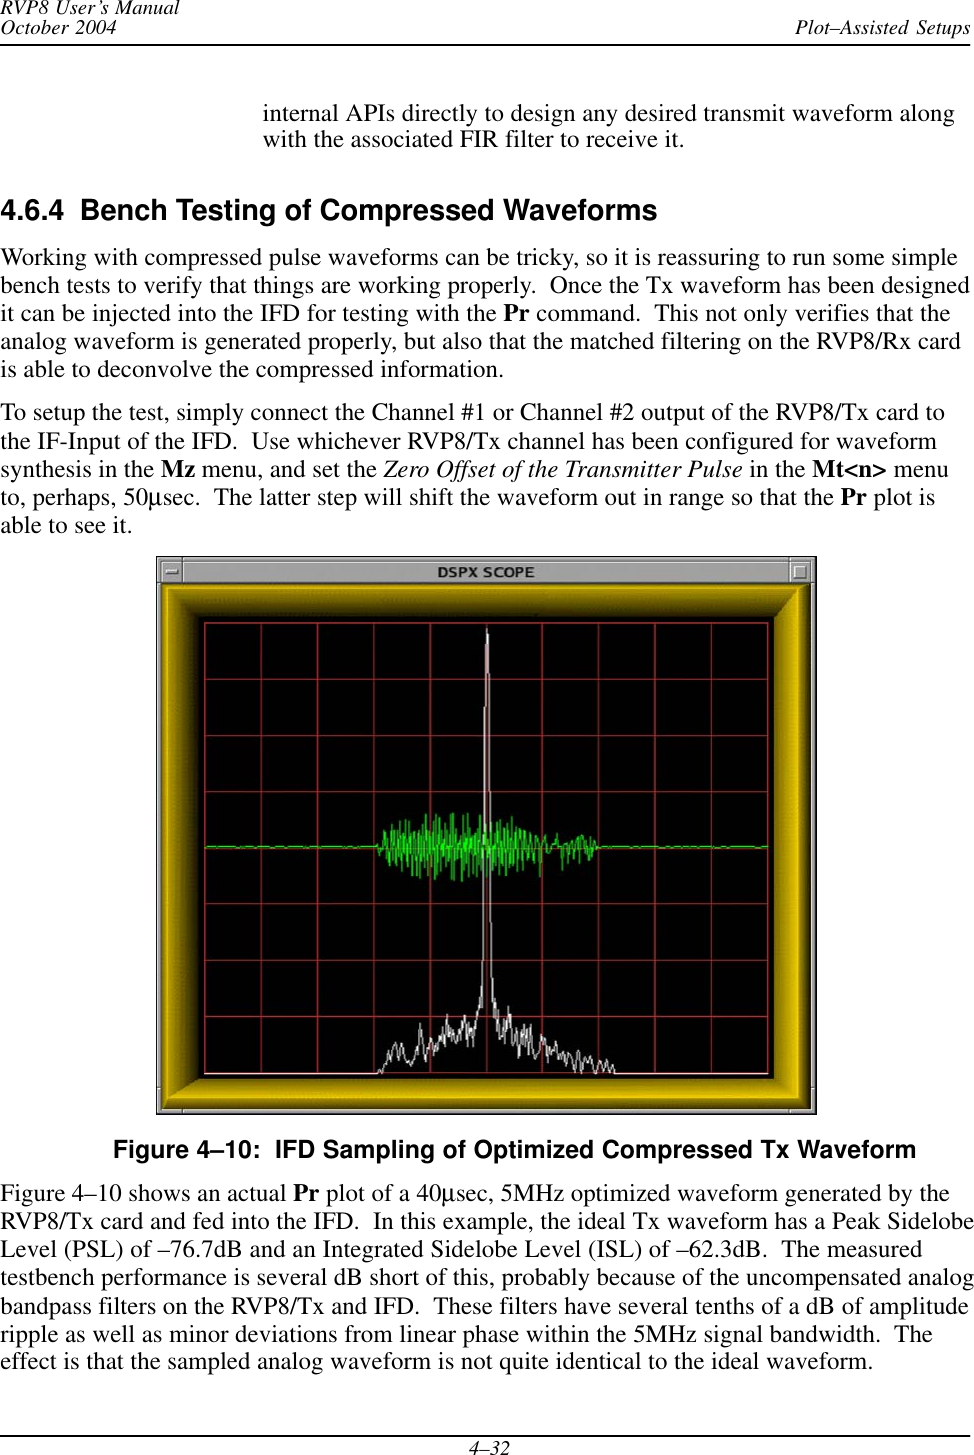 Plot–Assisted SetupsRVP8 User’s ManualOctober 20044–32internal APIs directly to design any desired transmit waveform alongwith the associated FIR filter to receive it.4.6.4  Bench Testing of Compressed WaveformsWorking with compressed pulse waveforms can be tricky, so it is reassuring to run some simplebench tests to verify that things are working properly.  Once the Tx waveform has been designedit can be injected into the IFD for testing with the Pr command.  This not only verifies that theanalog waveform is generated properly, but also that the matched filtering on the RVP8/Rx cardis able to deconvolve the compressed information.To setup the test, simply connect the Channel #1 or Channel #2 output of the RVP8/Tx card tothe IF-Input of the IFD.  Use whichever RVP8/Tx channel has been configured for waveformsynthesis in the Mz menu, and set the Zero Offset of the Transmitter Pulse in the Mt&lt;n&gt; menuto, perhaps, 50μsec.  The latter step will shift the waveform out in range so that the Pr plot isable to see it.Figure 4–10:  IFD Sampling of Optimized Compressed Tx WaveformFigure 4–10 shows an actual Pr plot of a 40μsec, 5MHz optimized waveform generated by theRVP8/Tx card and fed into the IFD.  In this example, the ideal Tx waveform has a Peak SidelobeLevel (PSL) of –76.7dB and an Integrated Sidelobe Level (ISL) of –62.3dB.  The measuredtestbench performance is several dB short of this, probably because of the uncompensated analogbandpass filters on the RVP8/Tx and IFD.  These filters have several tenths of a dB of amplituderipple as well as minor deviations from linear phase within the 5MHz signal bandwidth.  Theeffect is that the sampled analog waveform is not quite identical to the ideal waveform.